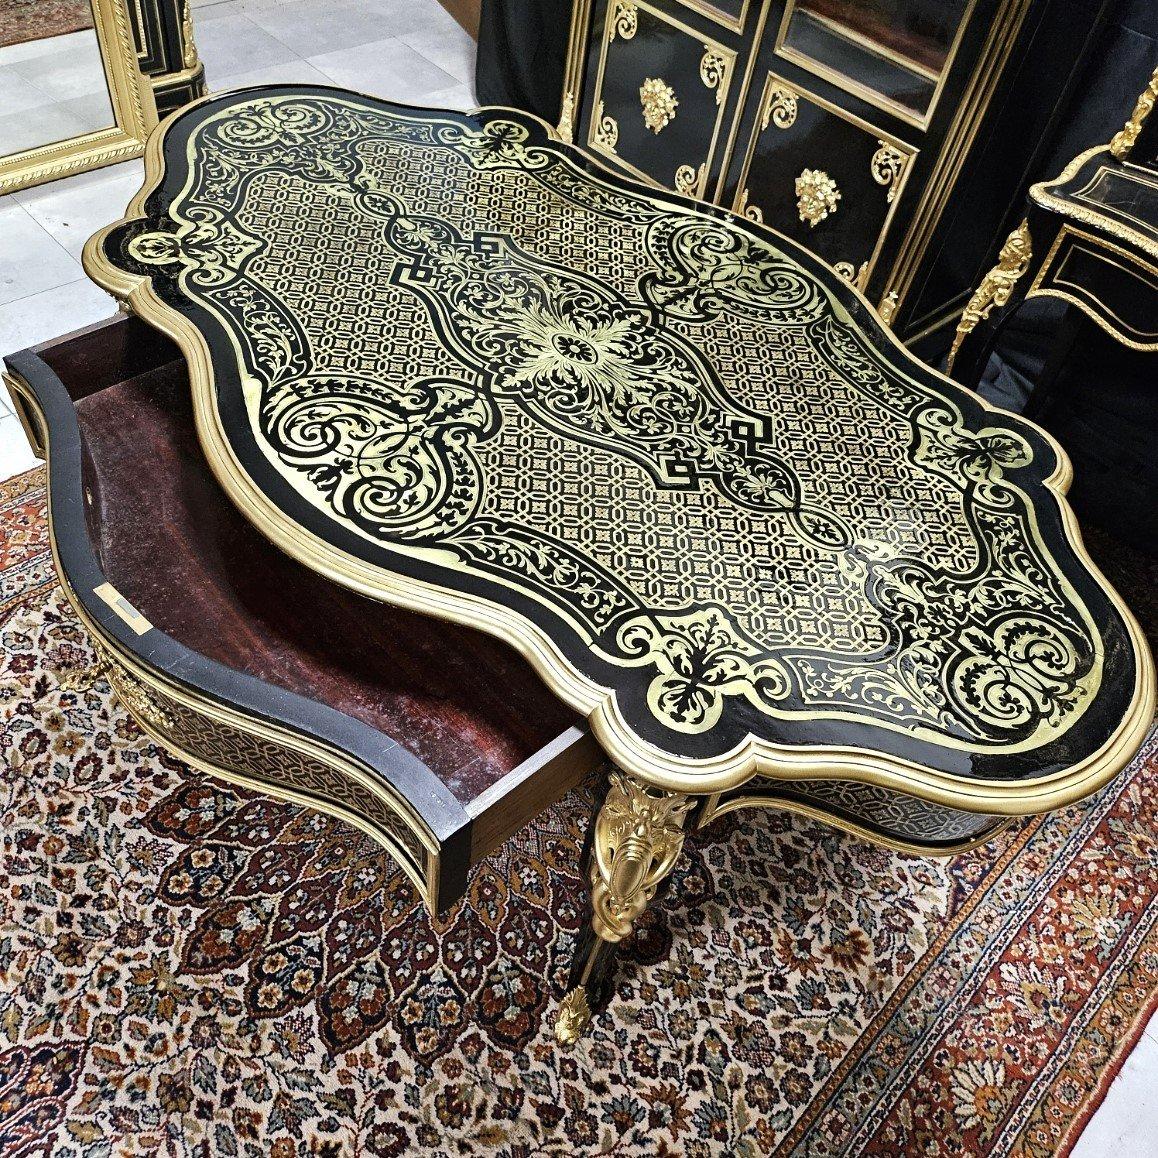 Stunning Table by Diehl in  Boulle Fiddle with rich  Fishnet Marquetry style, Napoleon III Period, Sumptuous violin-shaped center table, Boulle mesh style marquetry, in brass on an ebony veneer background, composed of interlacing large brass stars